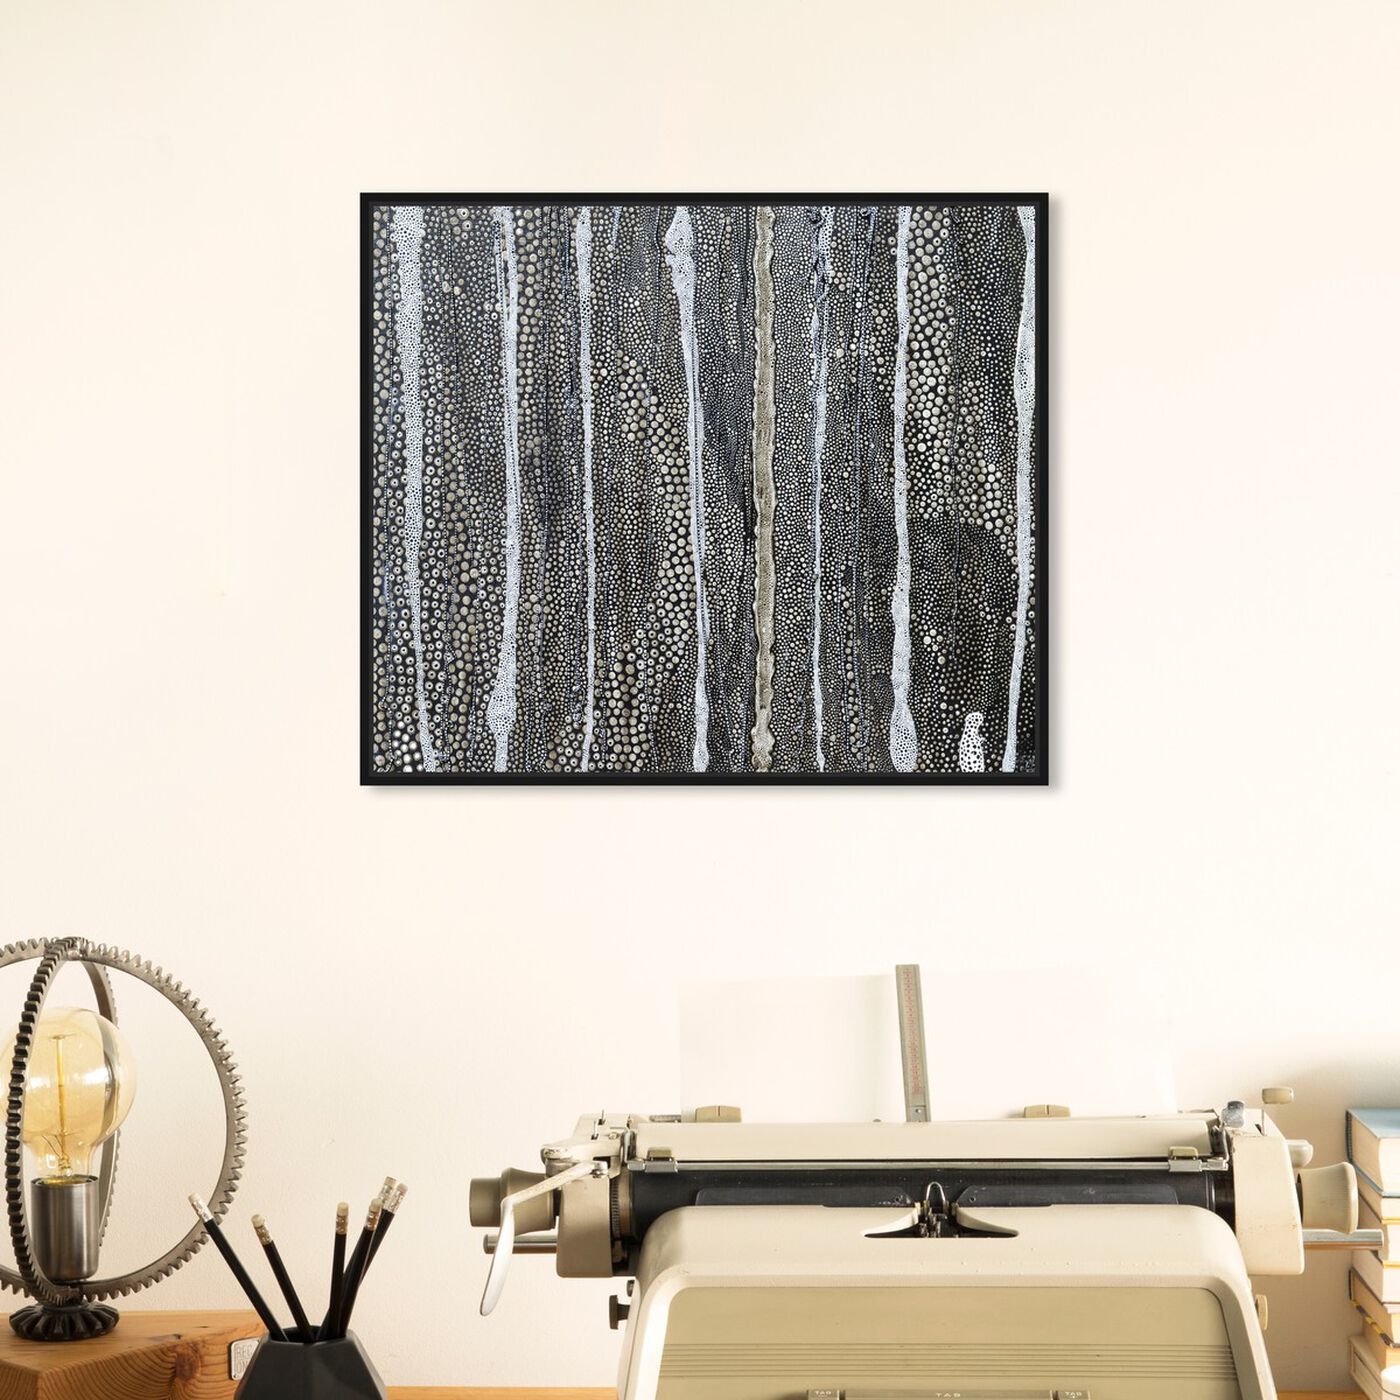 Hanging view of Enriqueta Ahrensburg - Black and white featuring abstract and textures art.